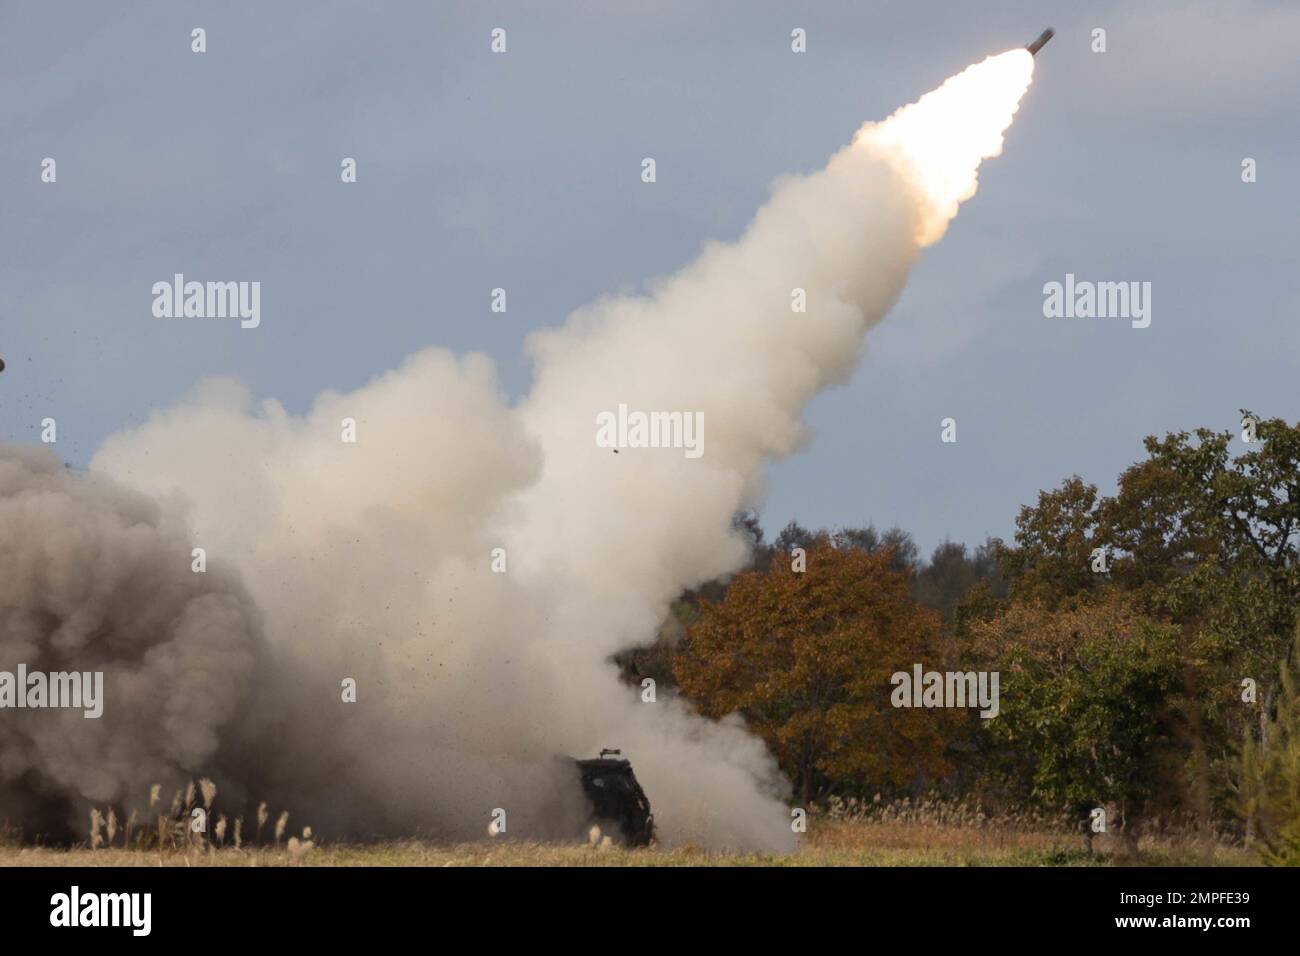 U.S. Marines with 3d Battalion, 12th Marines, 3d Marine Division, fire rockets from an M142 High Mobility Artillery Rocket System during exercise Resolute Dragon 22 at Yausubetsu Maneuver Area, Hokkaido, Japan, Oct. 14, 2022. Resolute Dragon 22 is an annual bilateral exercise designed to strengthen the defensive capabilities of the U.S.-Japan Alliance by exercising integrated command and control, targeting, combined arms, and maneuver across multiple domains. Stock Photo